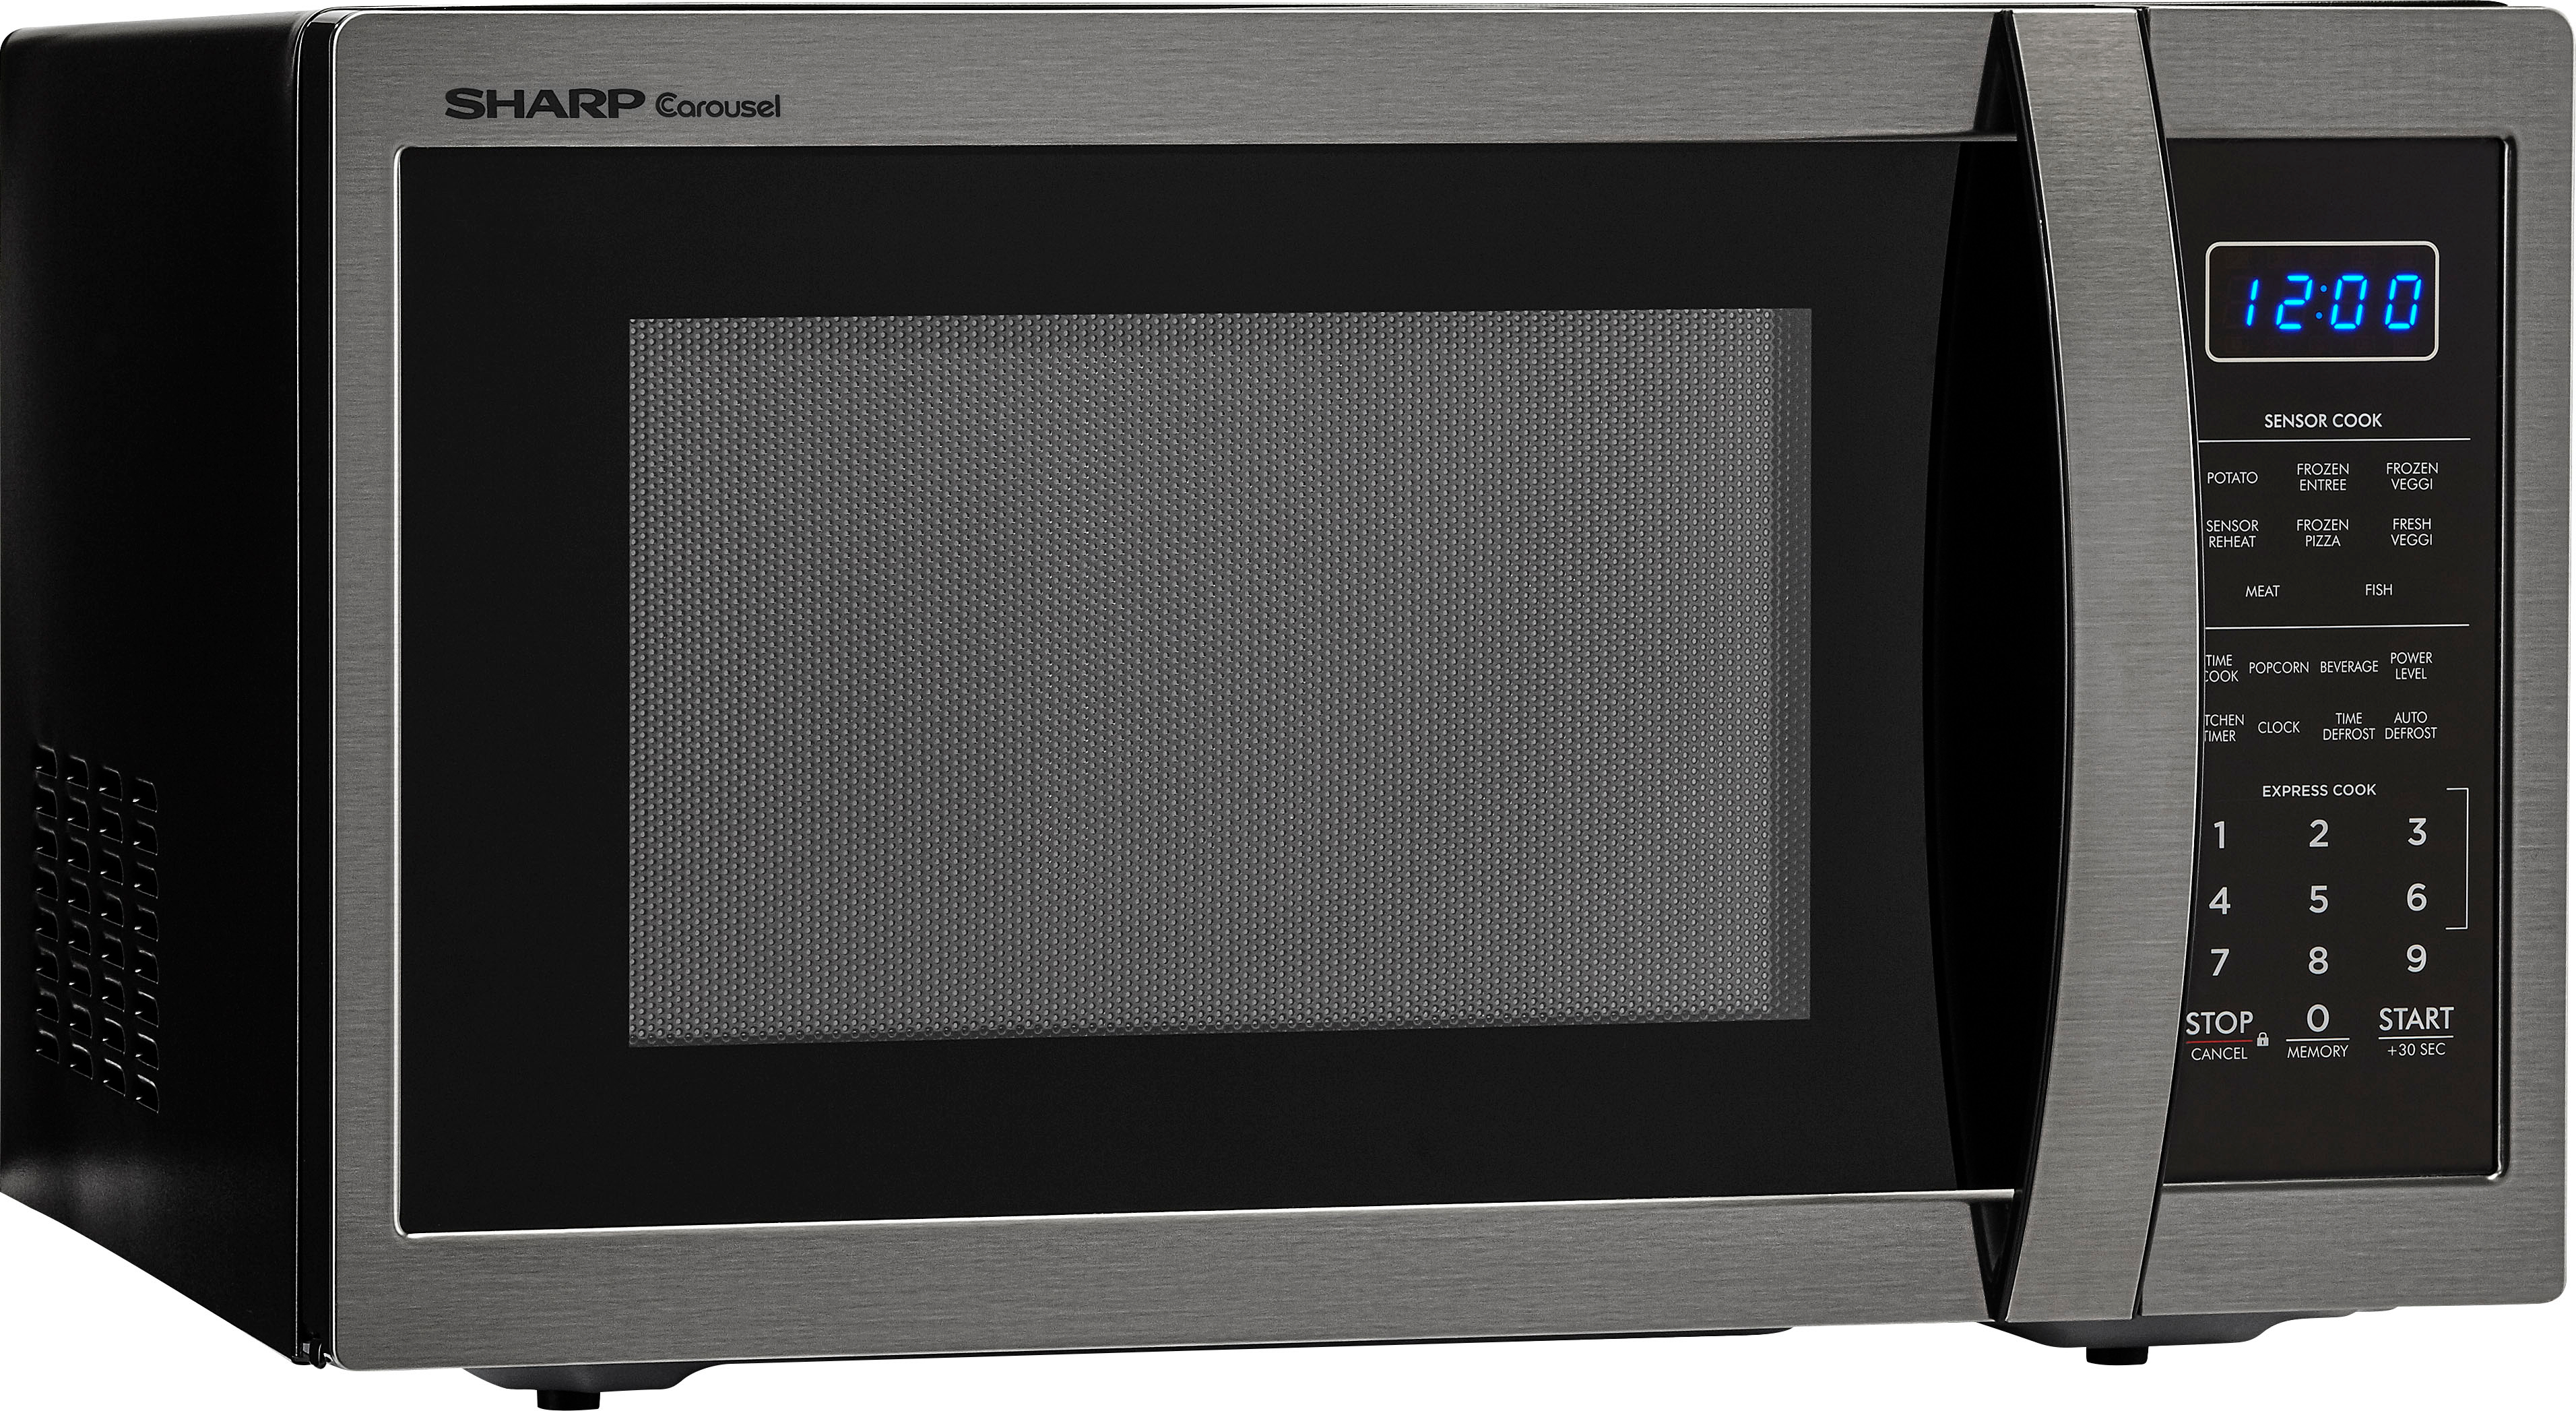 Angle View: Sharp - Carousel 1.4 Cu. Ft. Mid-Size Microwave - Black Stainless Steel